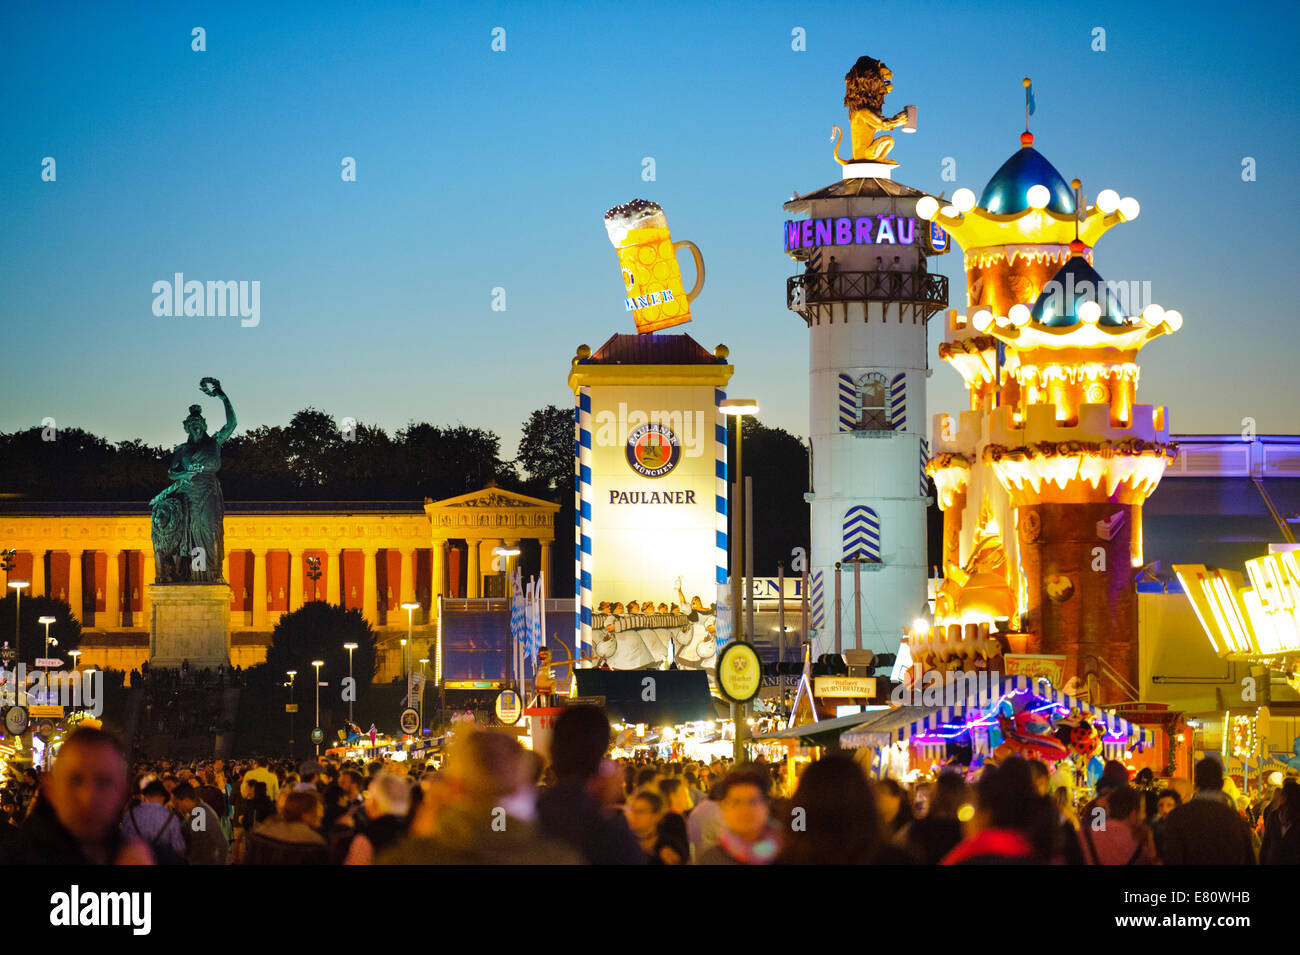 The Oktoberfest in Munich is the biggest beer festival of the world with many amusement huts, beer tents and carousels. Stock Photo